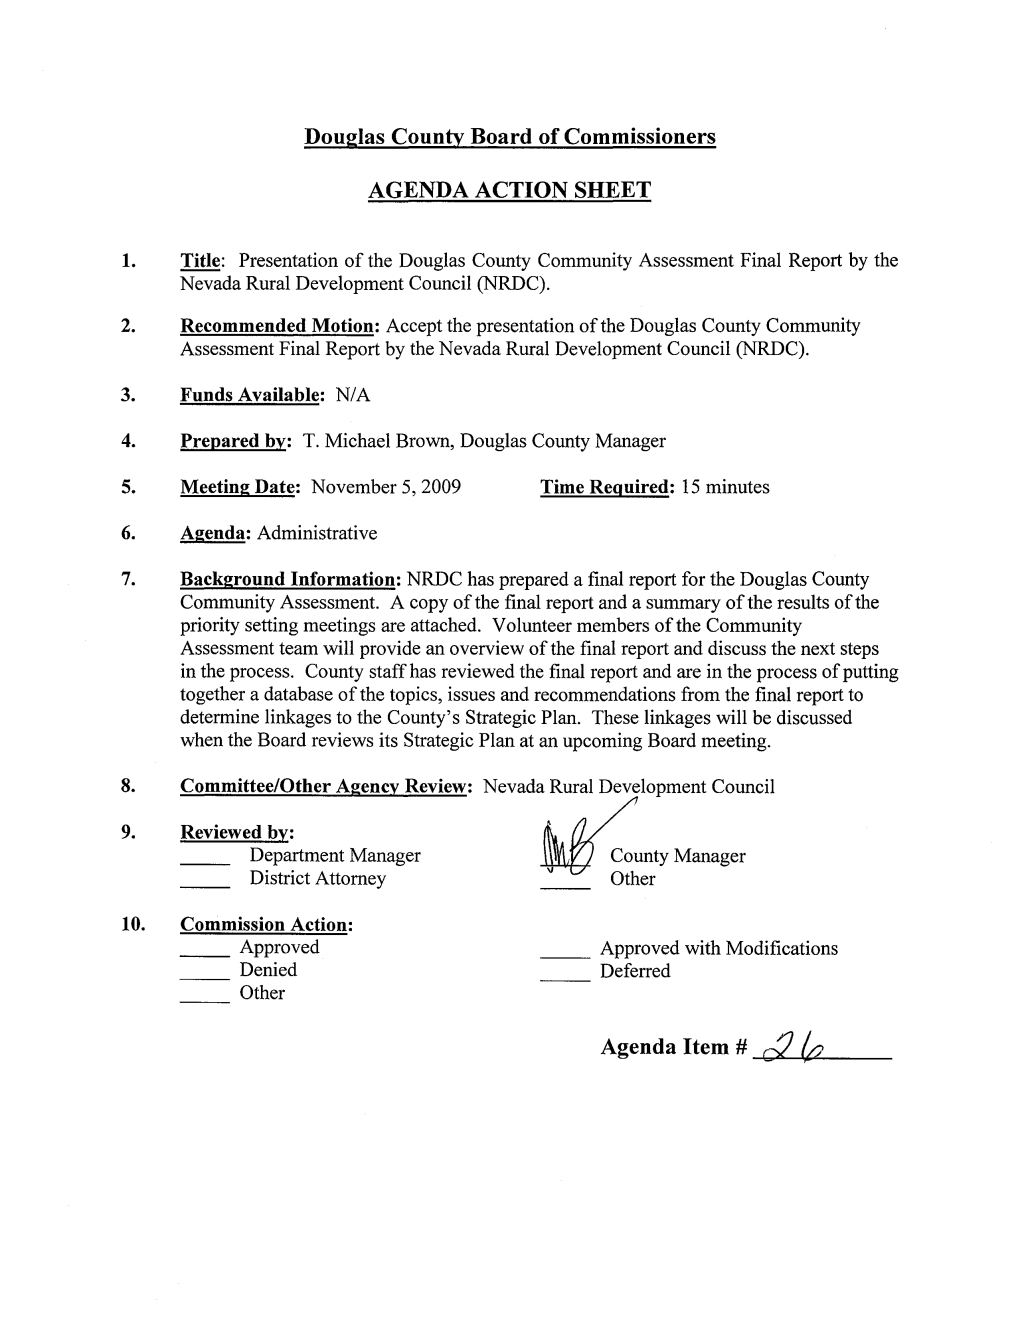 Douglas County Board of Commissioners AGENDA ACTION